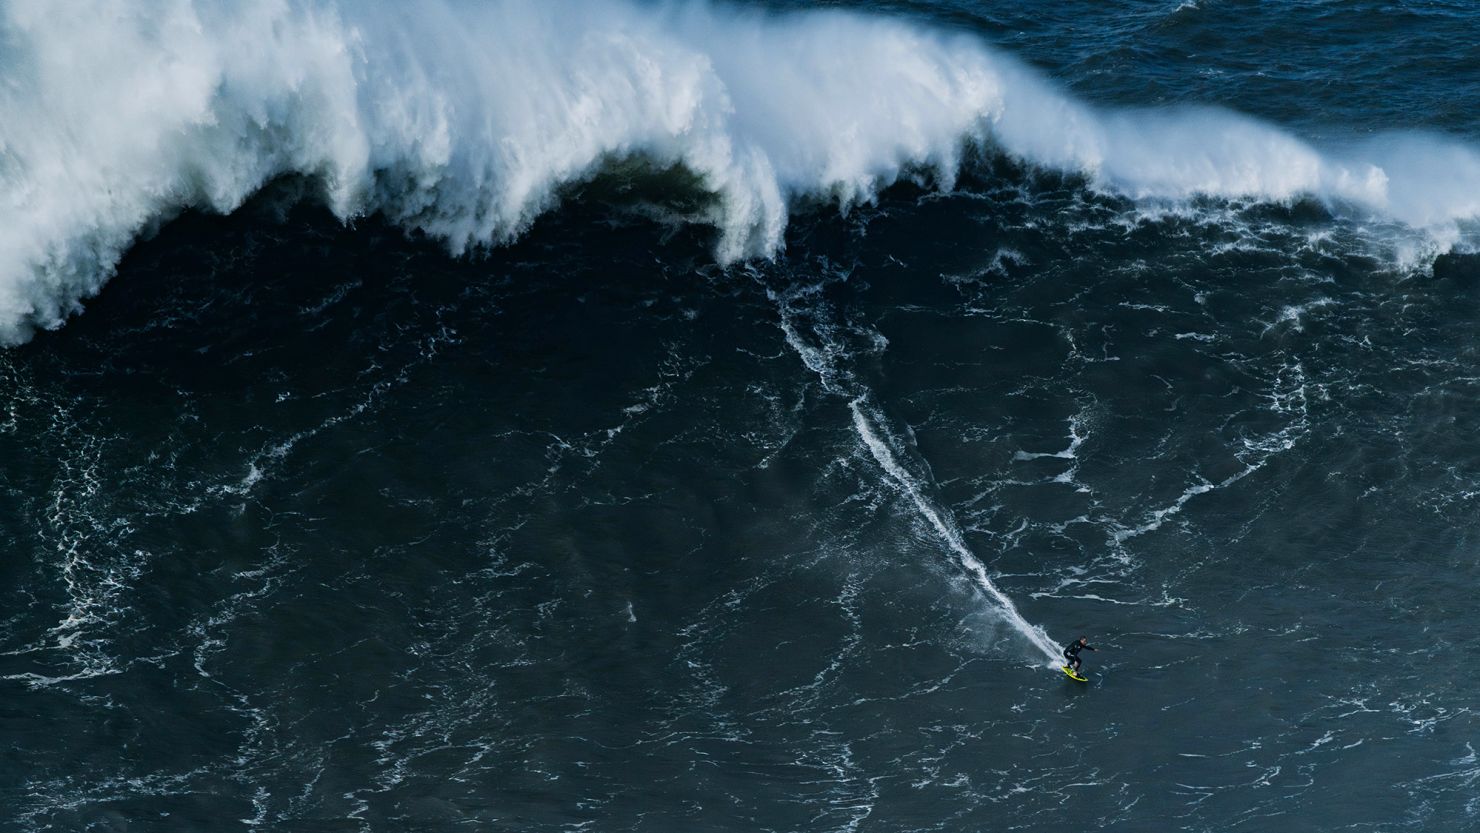 Steudtner surfs the 86-foot wave in Nazaré, Portugal in February.